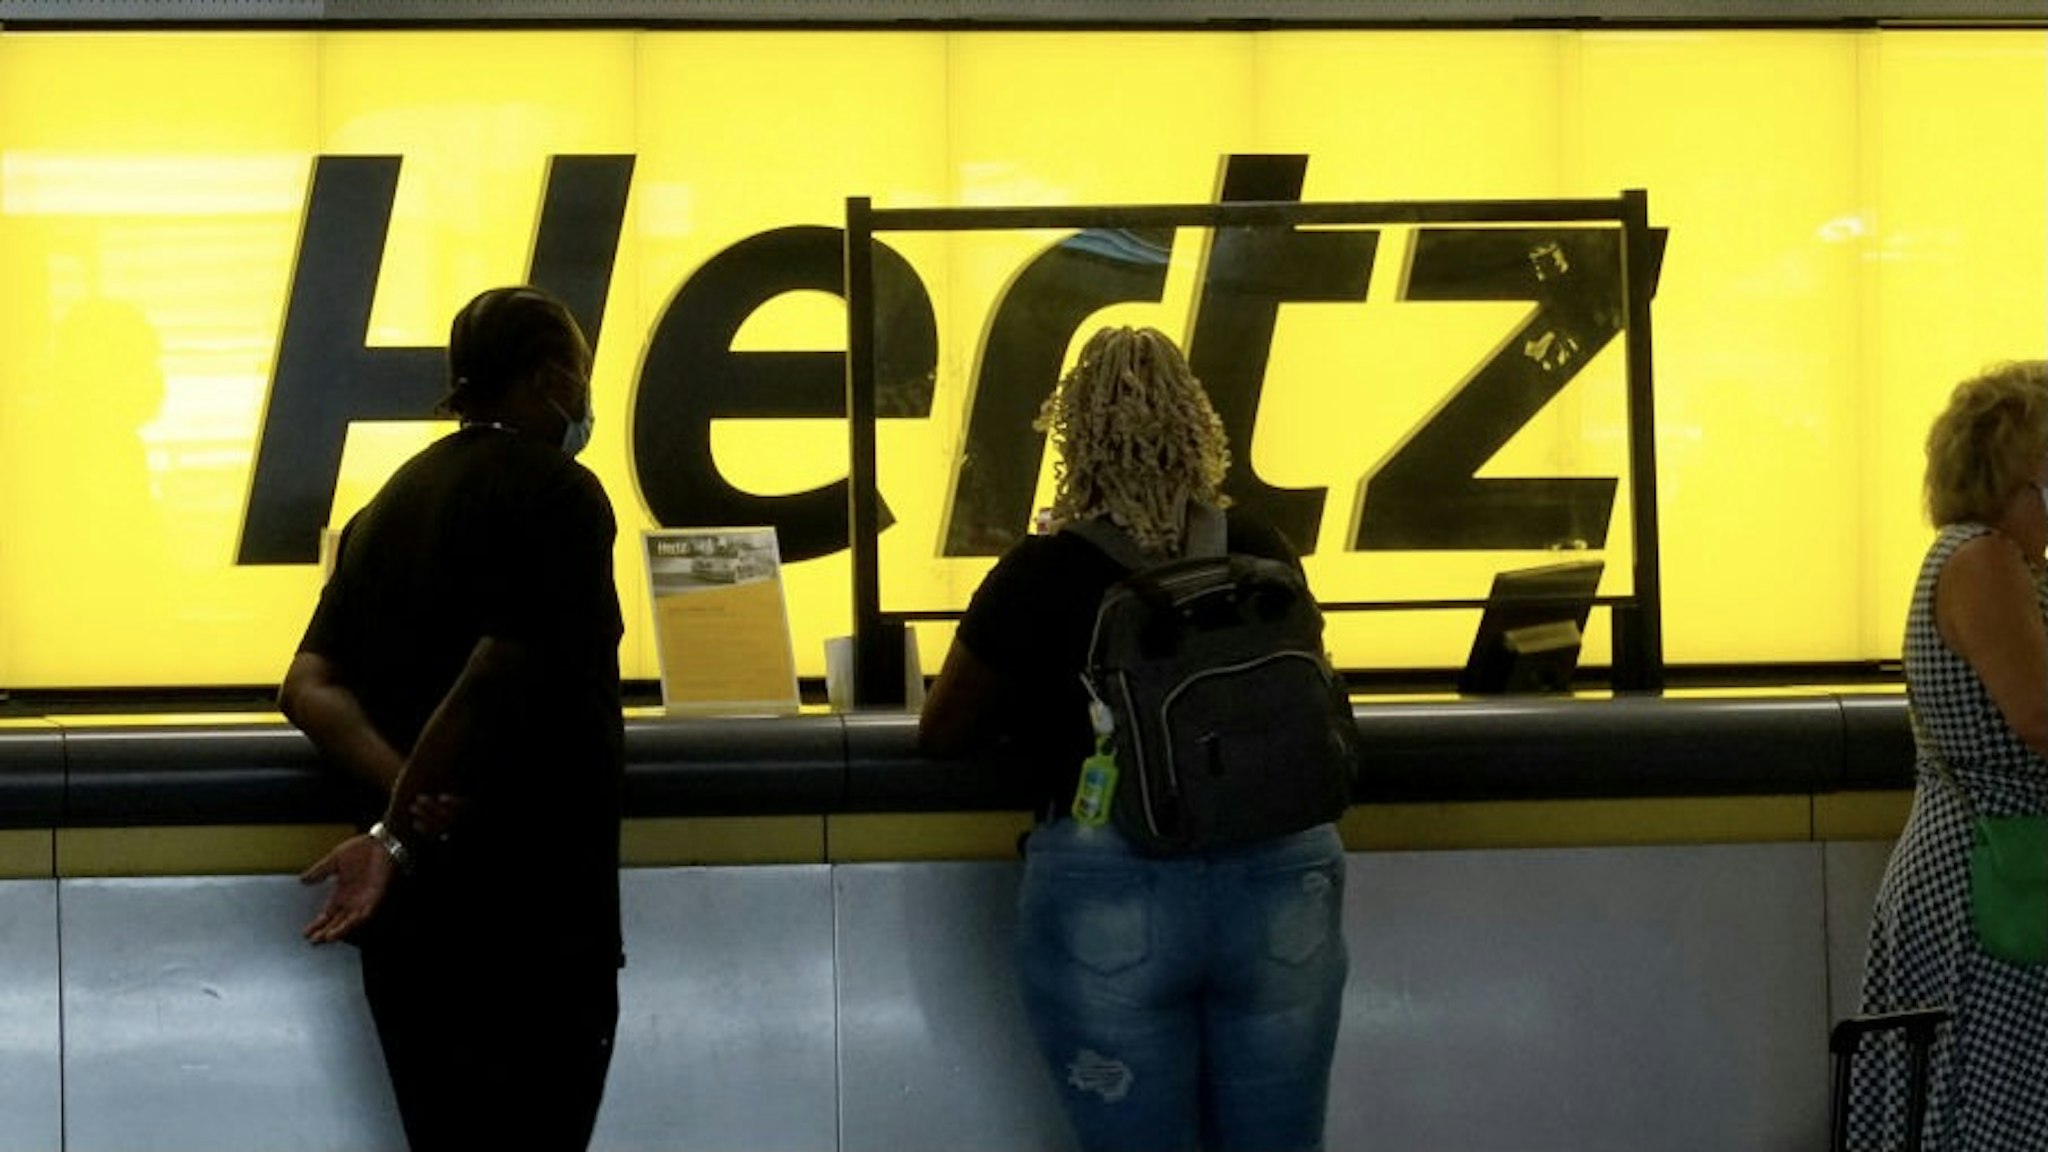 Hertz To Buy 100,000 Tesla Vehicles For Its Fleet FORT LAUDERDALE, FLORIDA - OCTOBER 25: People stand at a Hertz car rental counter in the Fort Lauderdale-Hollywood International Airport on October 25, 2021 in Miami, Florida. Hertz announced that it ordered 100,000 Teslas as the company is emerging from bankruptcy. (Photo by Joe Raedle/Getty Images) Joe Raedle / Staff